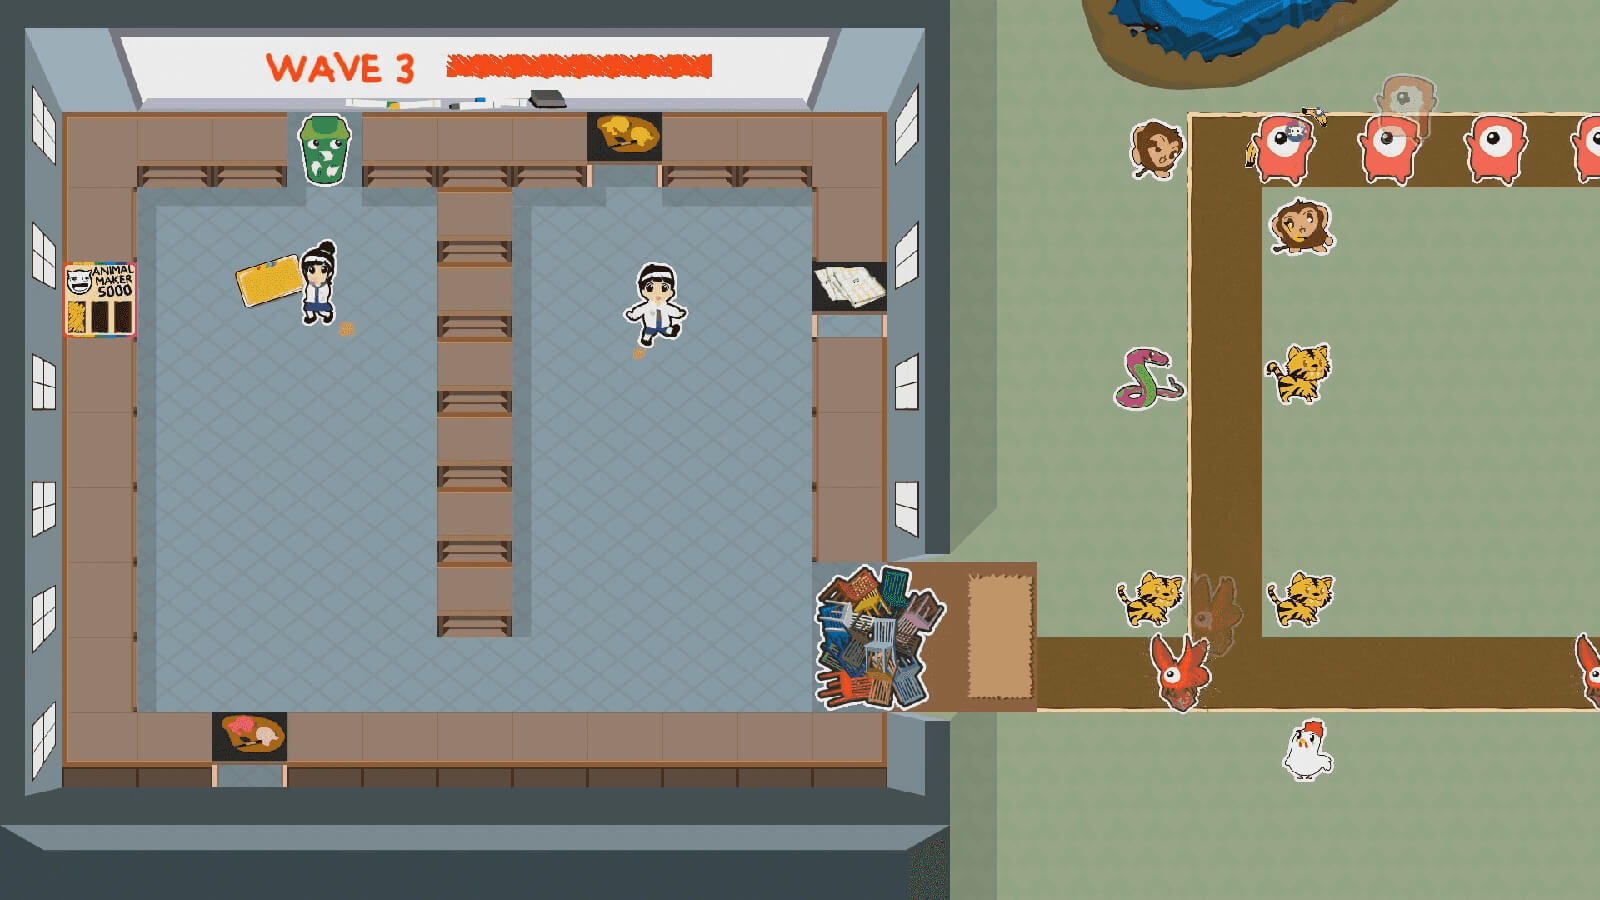 In a top-down view, a boy and girl are in a classroom. Outside, colorful animal stickers are attacking oncoming enemies.